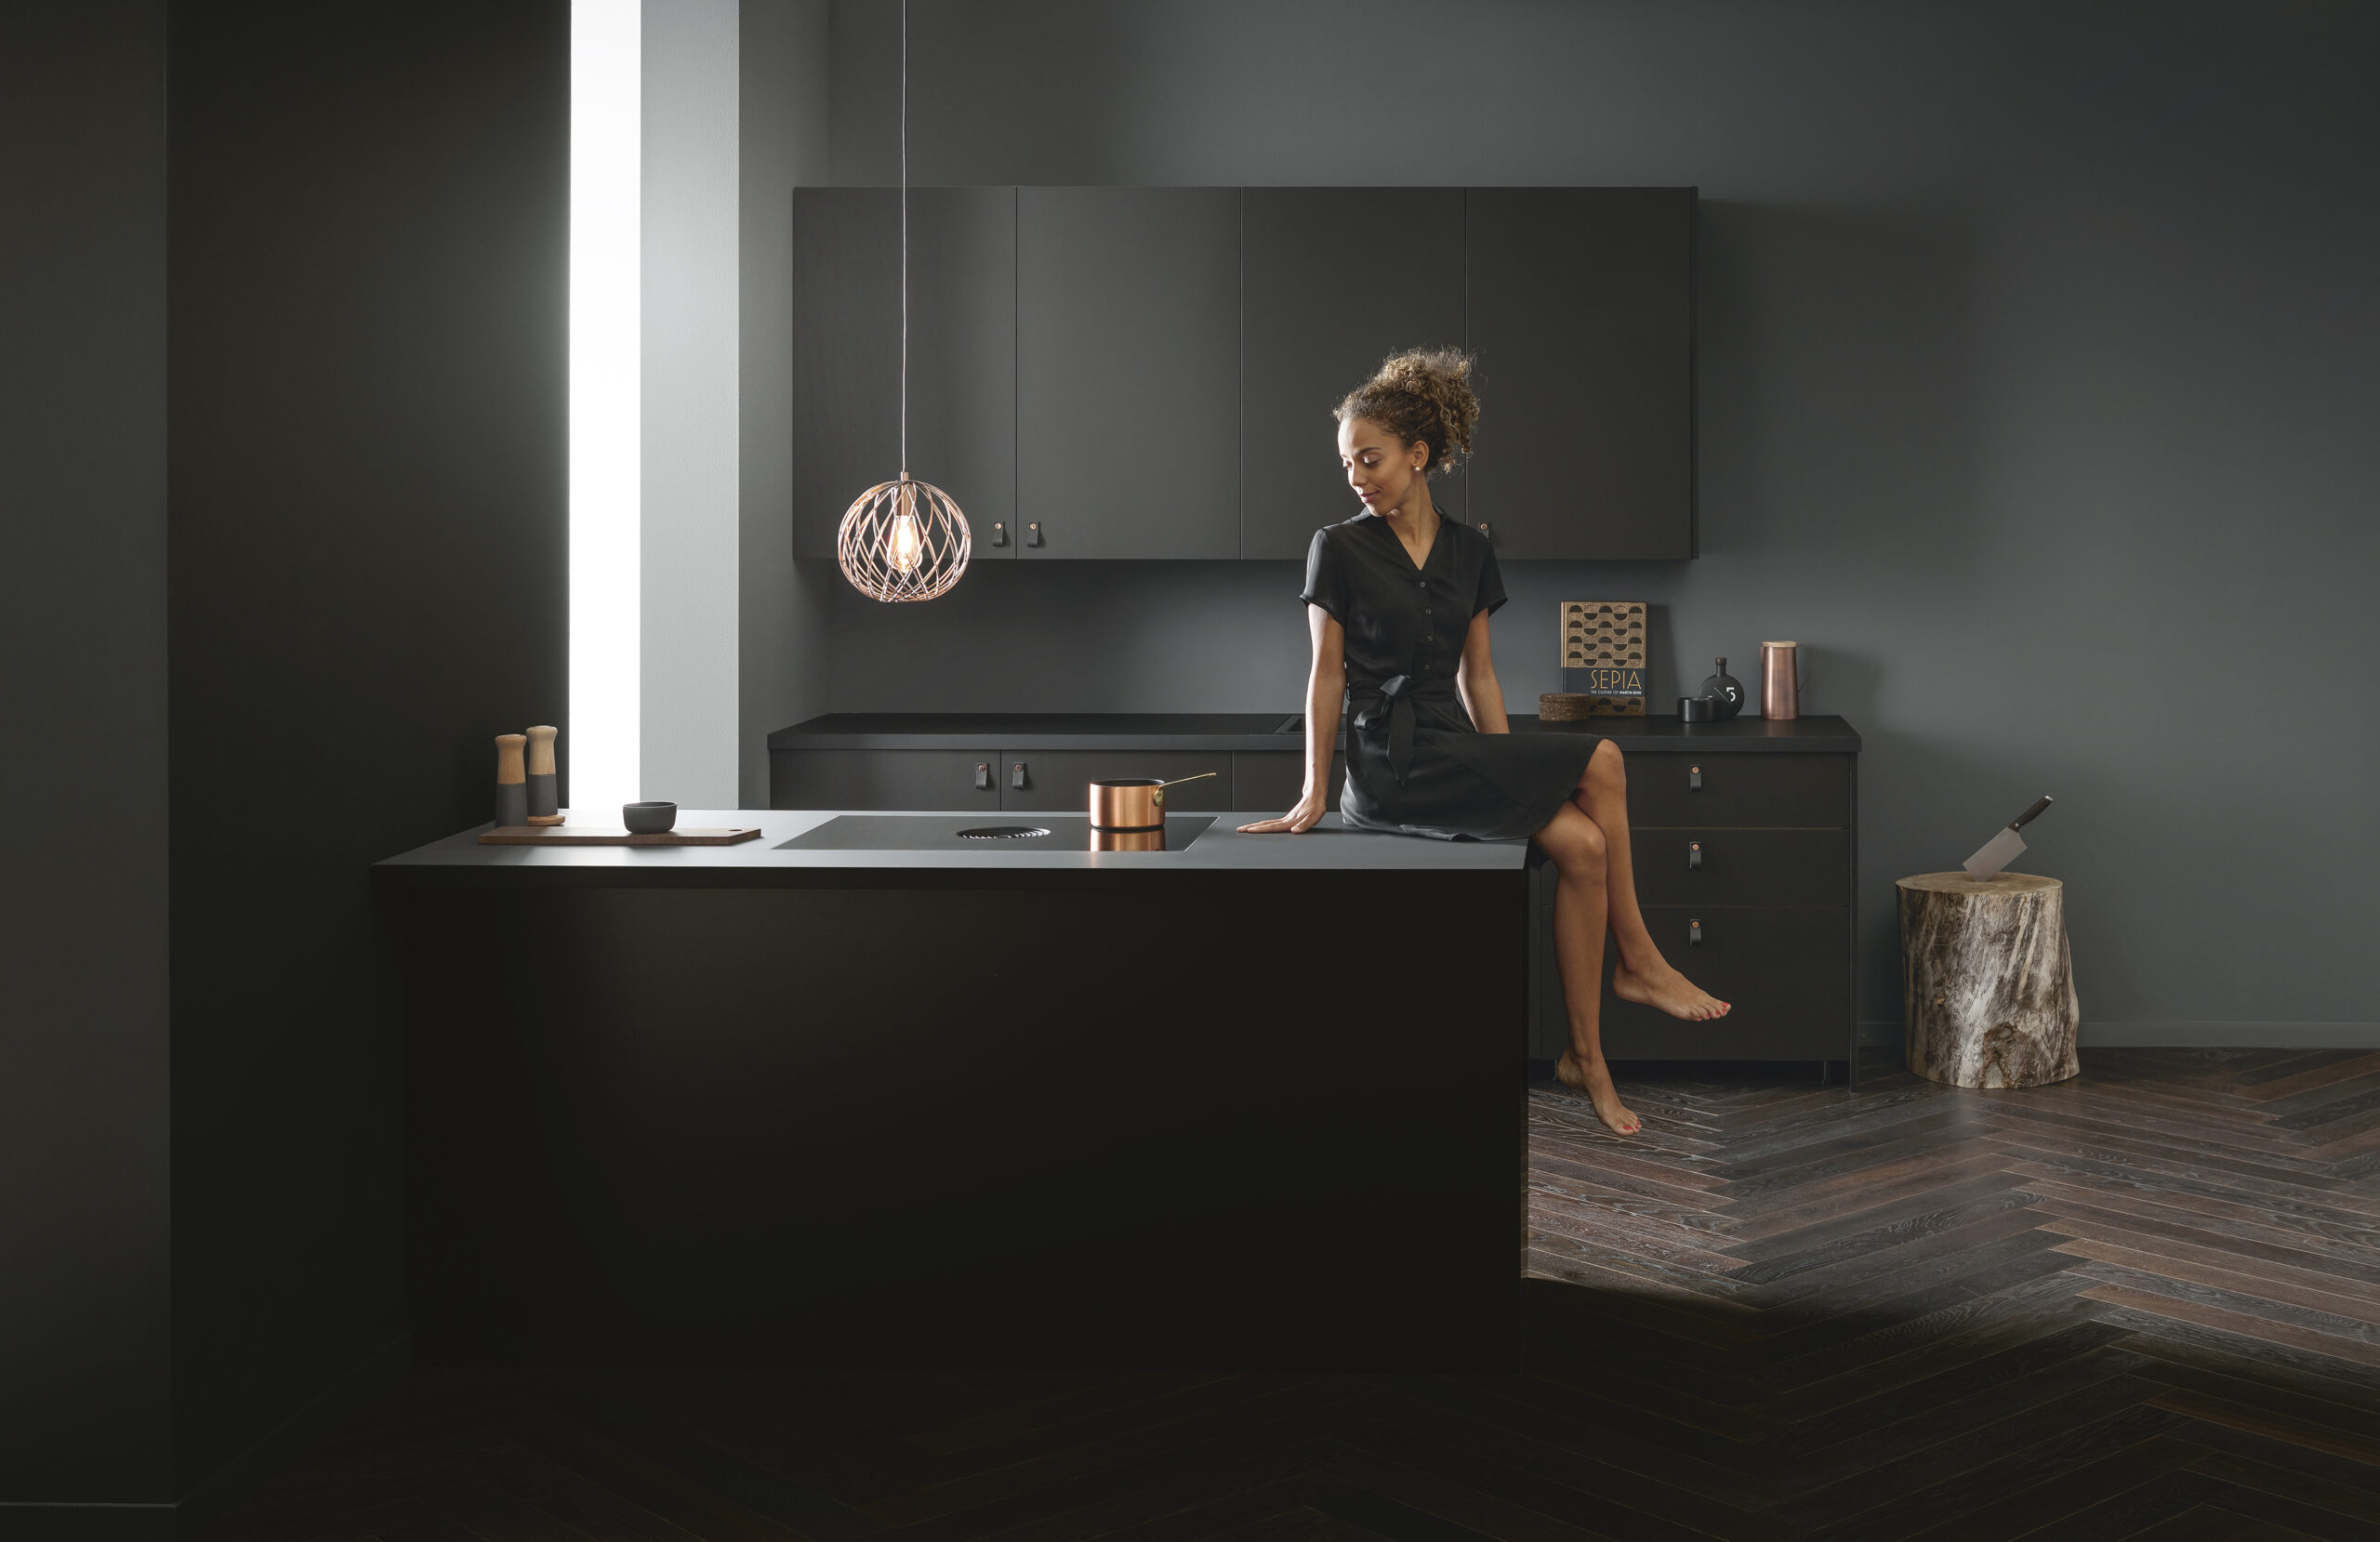 The history of the luxury appliance brand Bora. Made in Germany, sold by Krieder UK